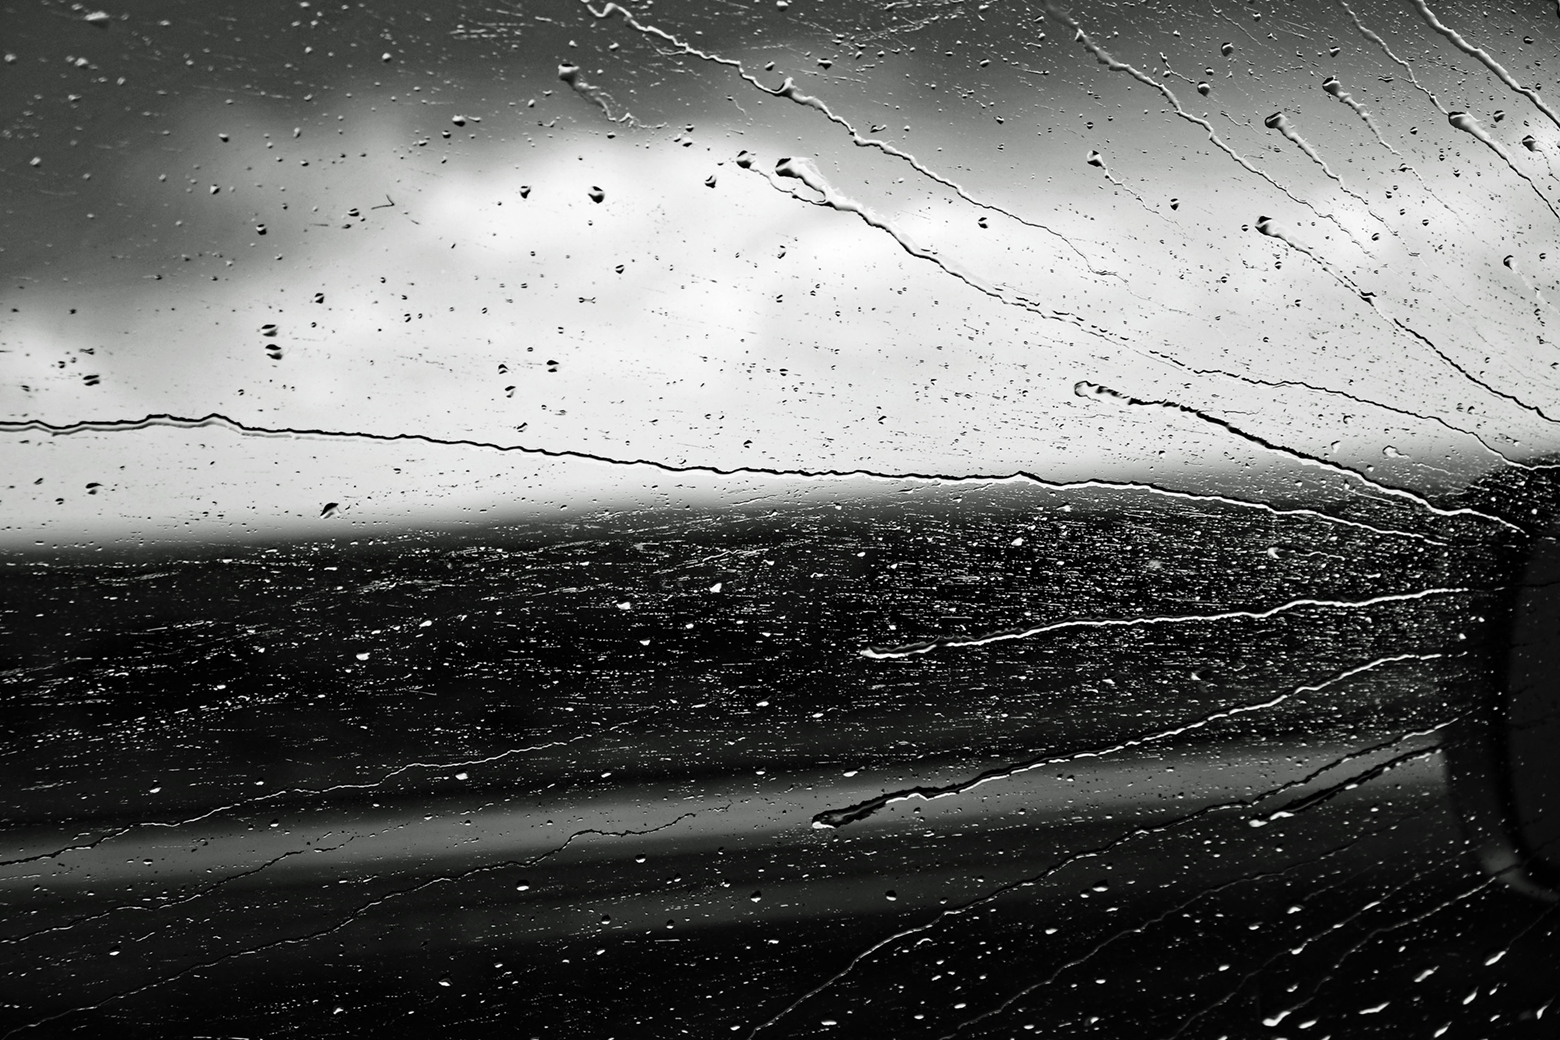 Rain streaks from right to left across a driver’s side car window viewed from inside a moving car. A small portion of the side mirror on the left is barely visible against the cloudy gray sky and the dark landscape.